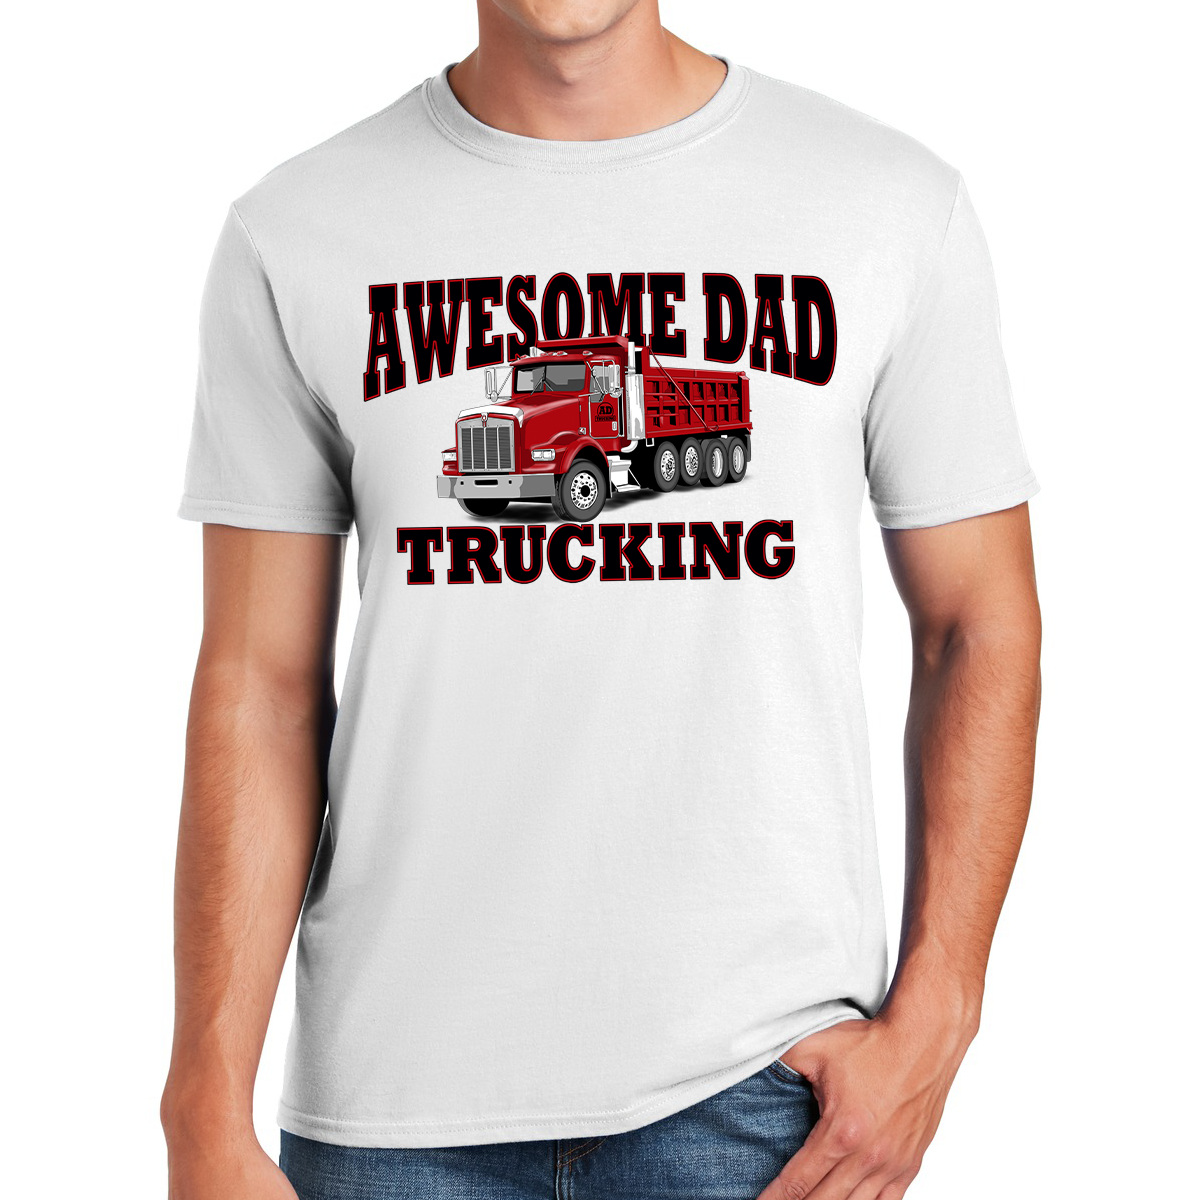 Awesome Dad Dump Truck Hauling Love And Fun In Fatherhood Gift For Dads T-shirt